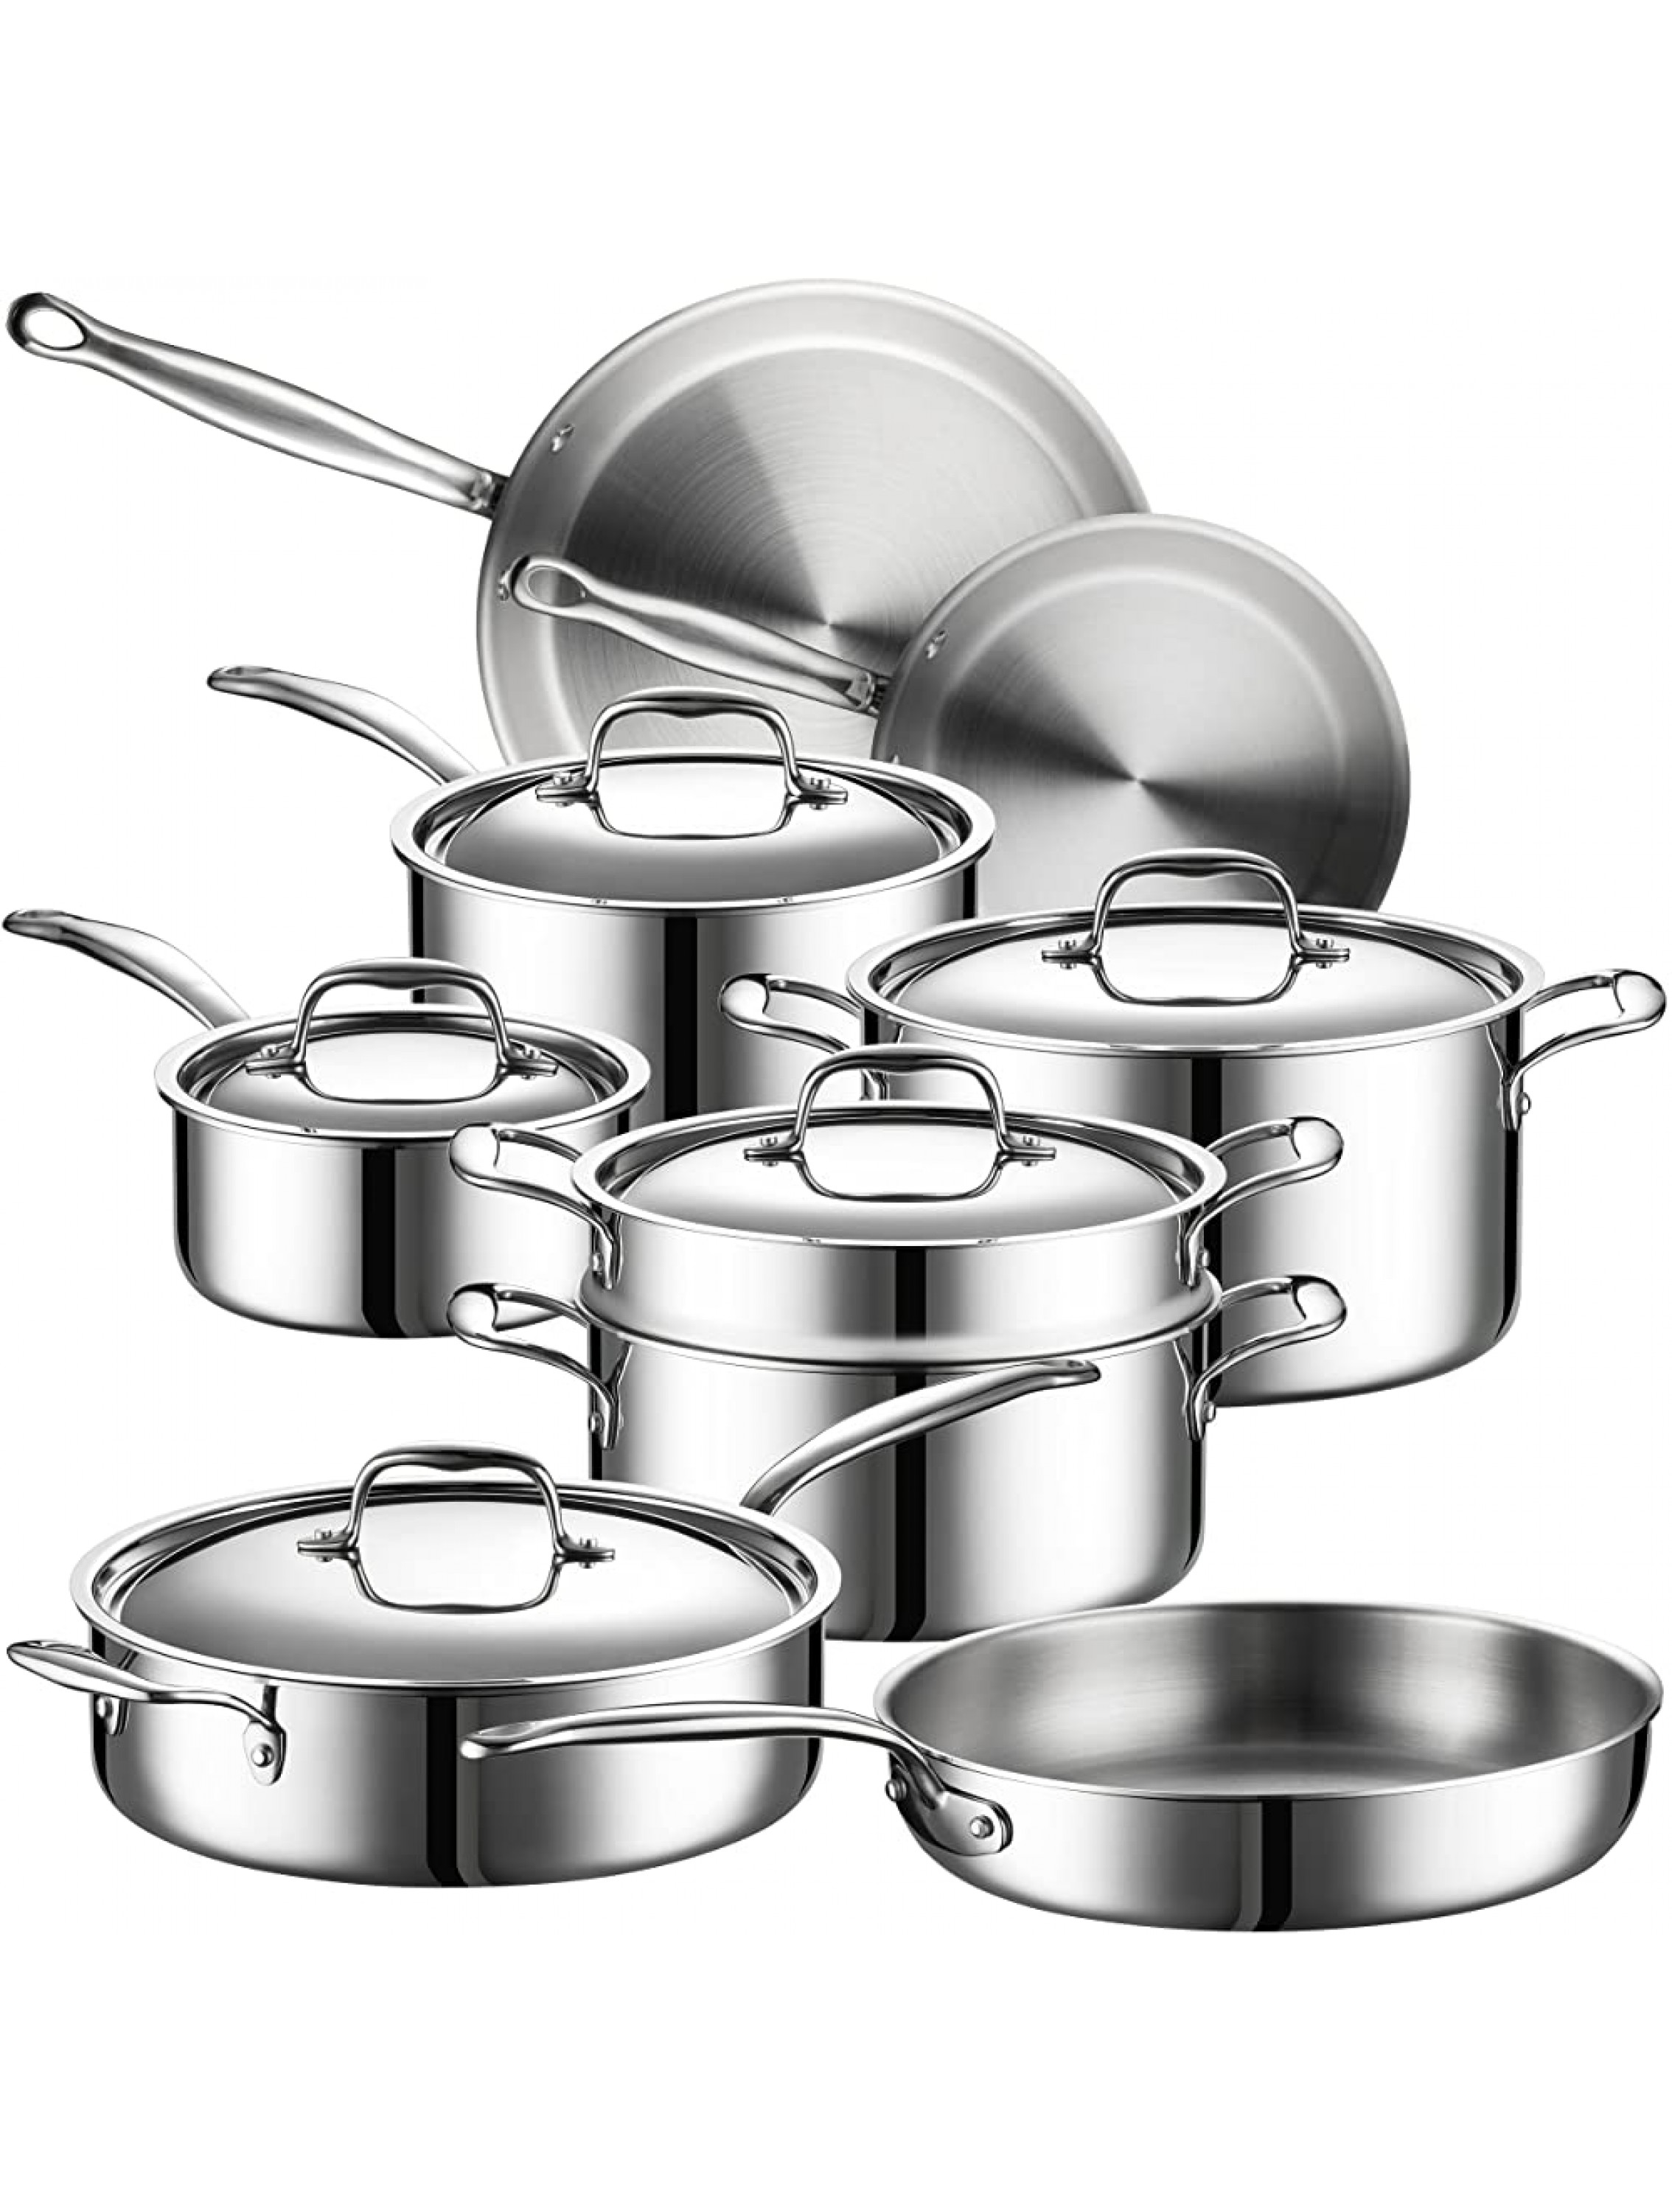 Legend 5-Ply Stainless Steel Cookware Set | MultiPly SuperStainless 14-Piece Professional Home Chef Grade Clad Pots & Pans Sets | All Surface Induction & Oven Safe | Premium Gifts for Men & Women - BSA454J01